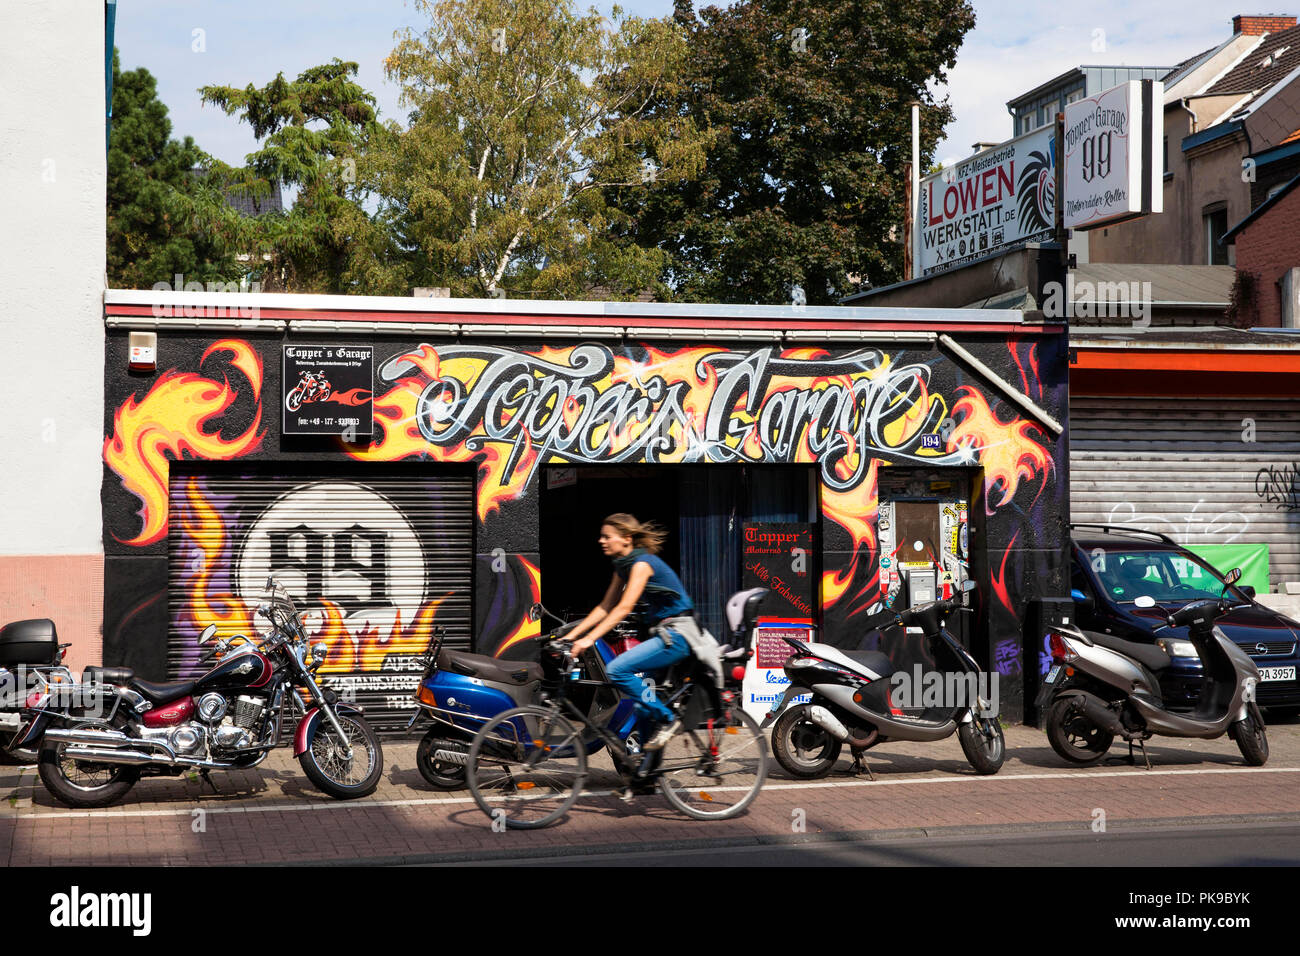 motorcycle garage Topper's Garage at the Subbelrather street in the  district Ehrenfeld, Cologne, Germany. Motorrad Werkstatt Topper's Garage an  der S Stock Photo - Alamy